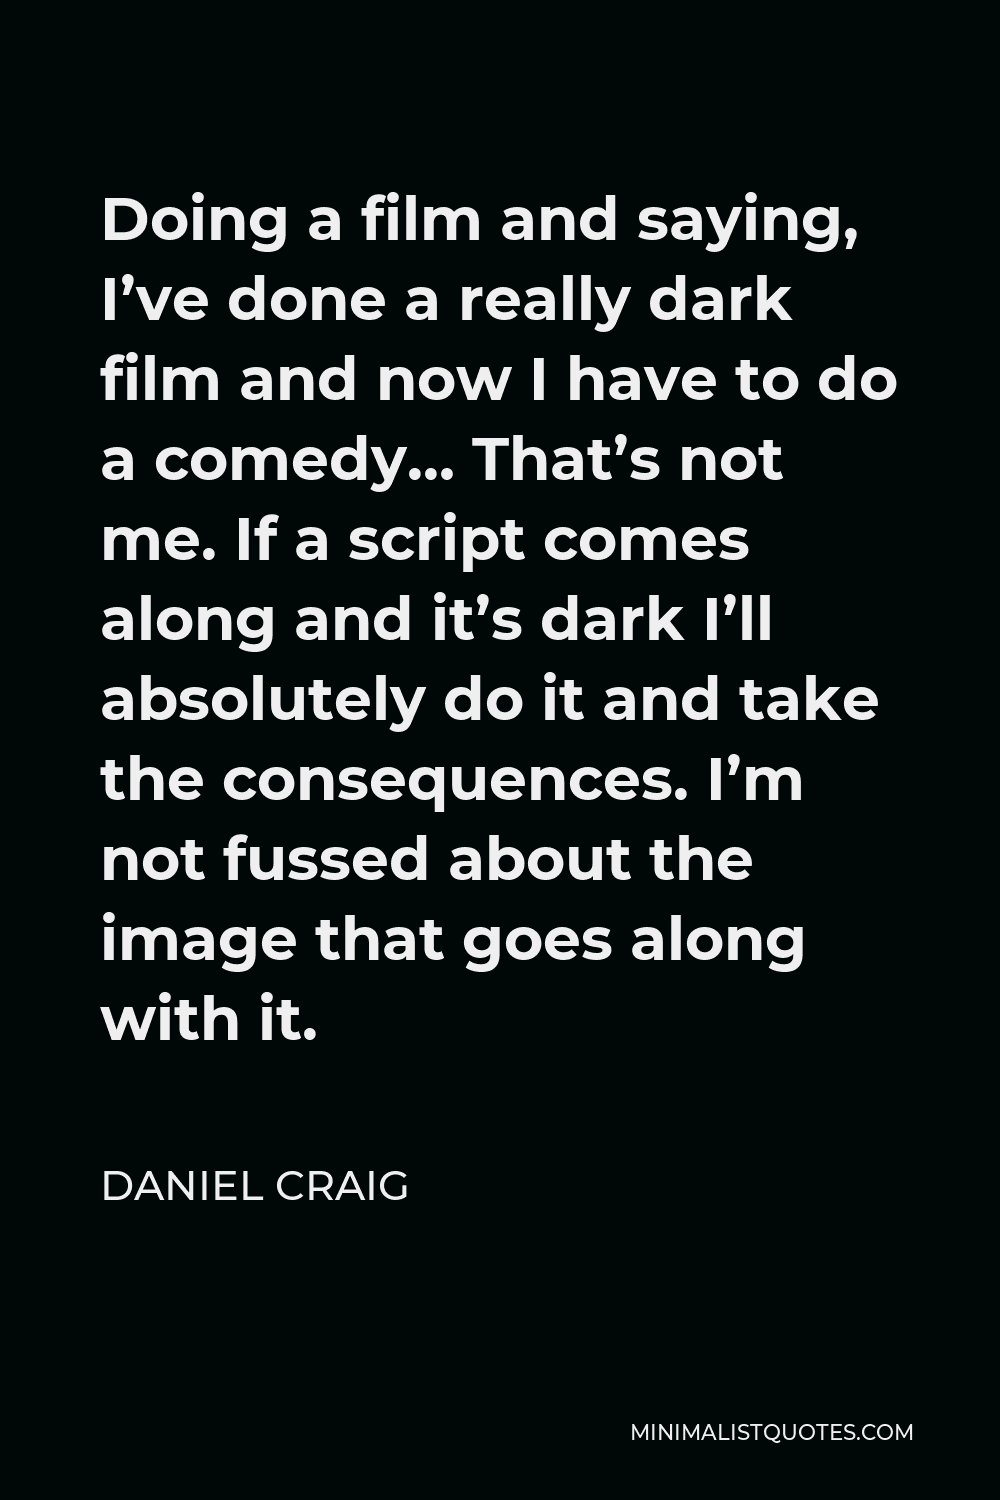 Daniel Craig Quote - Doing a film and saying, I’ve done a really dark film and now I have to do a comedy… That’s not me. If a script comes along and it’s dark I’ll absolutely do it and take the consequences. I’m not fussed about the image that goes along with it.